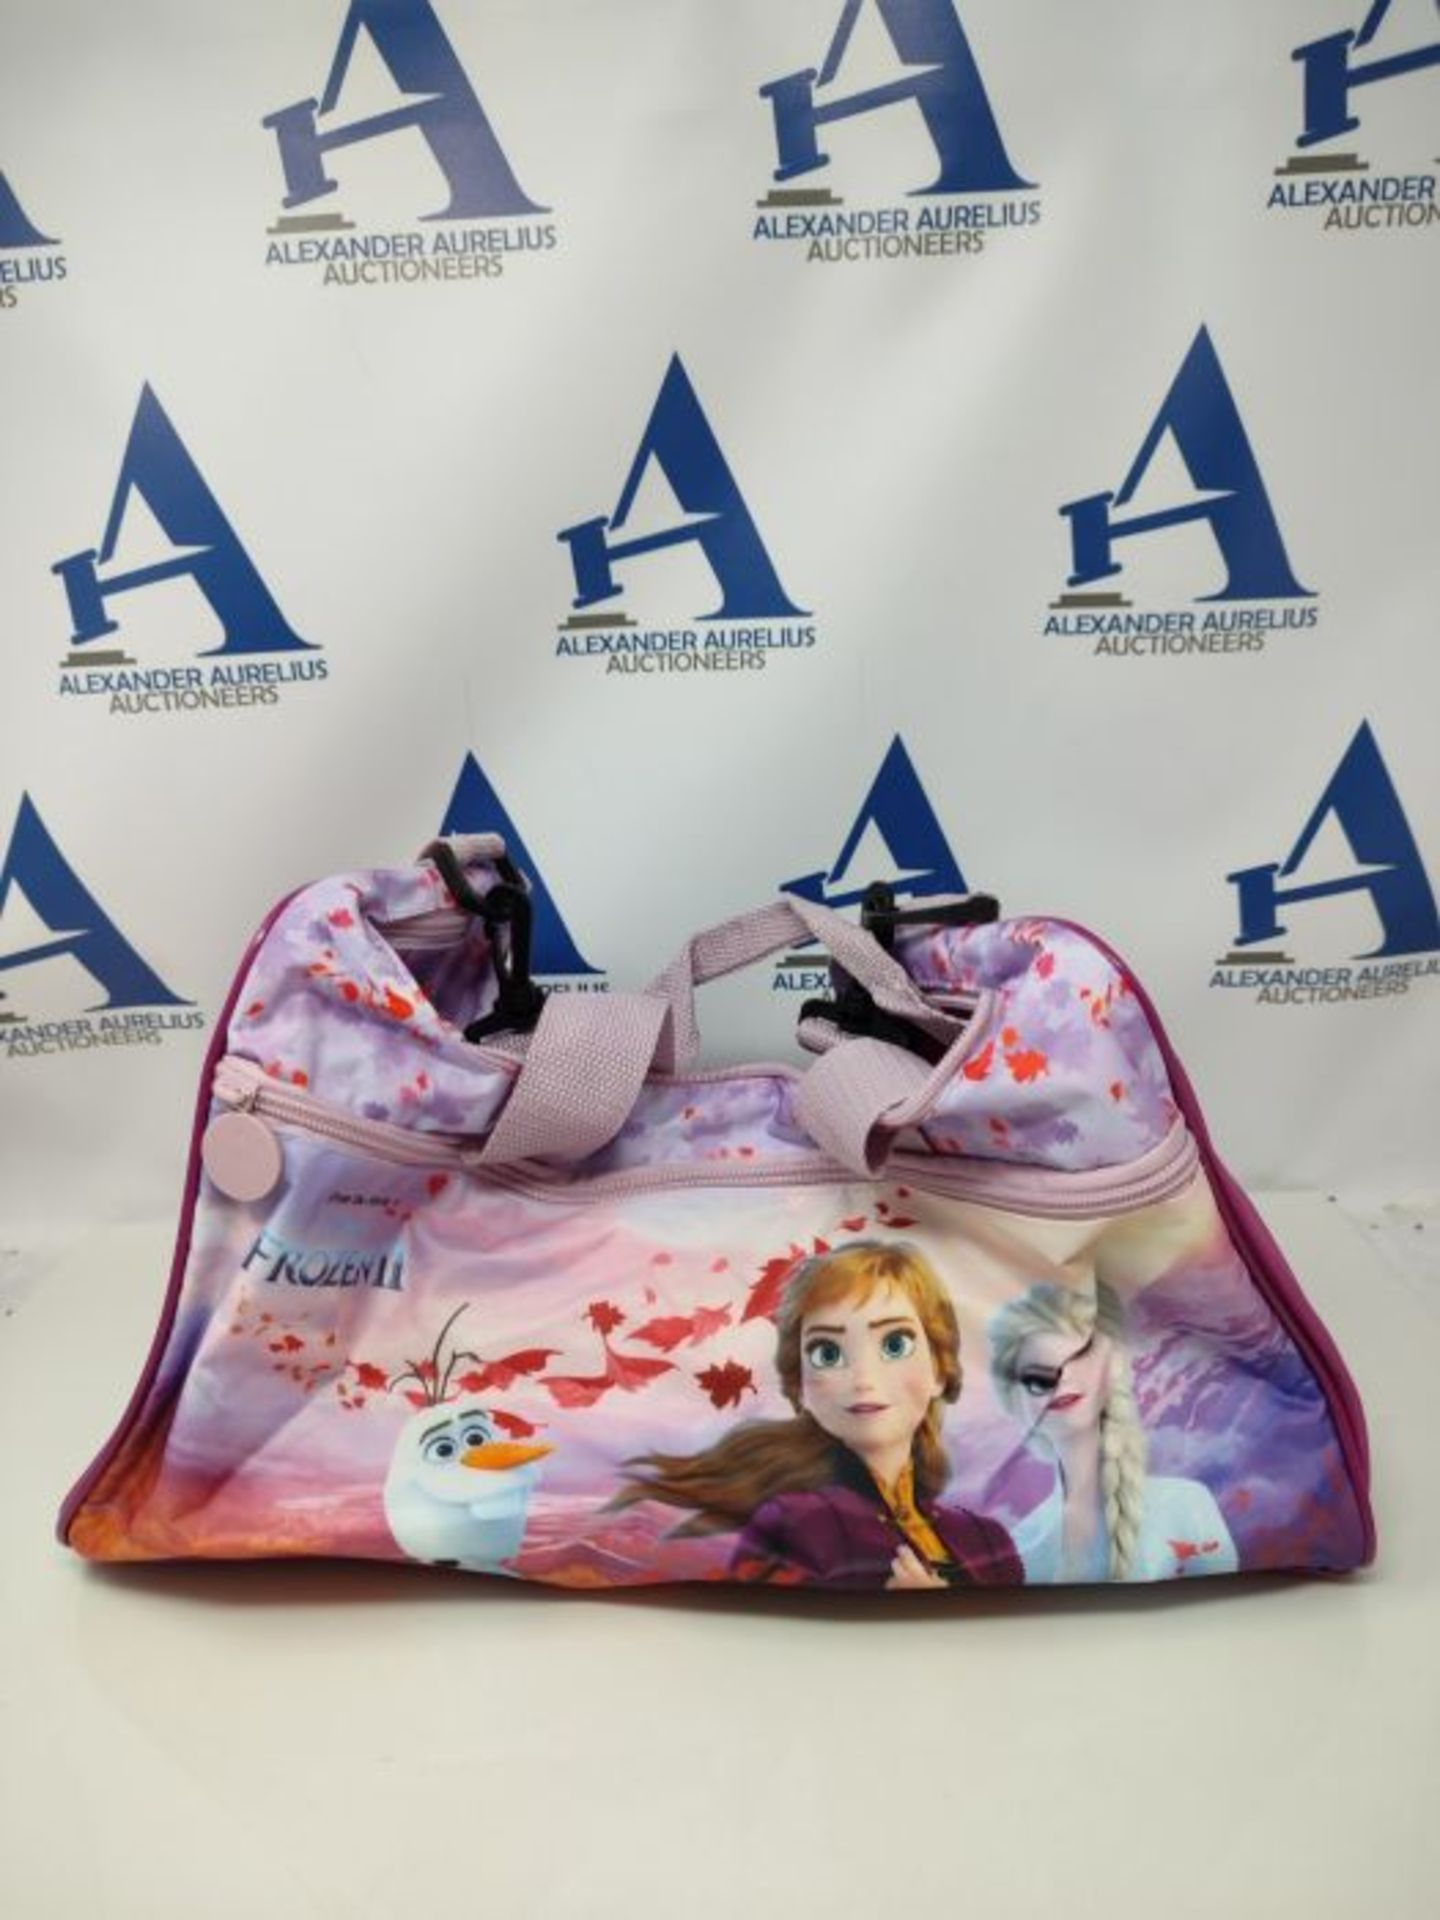 PERLETTI Disney Frozen 2 Duffle Bag for Little Girls - Sports Bag for Kids with Prince - Image 2 of 2